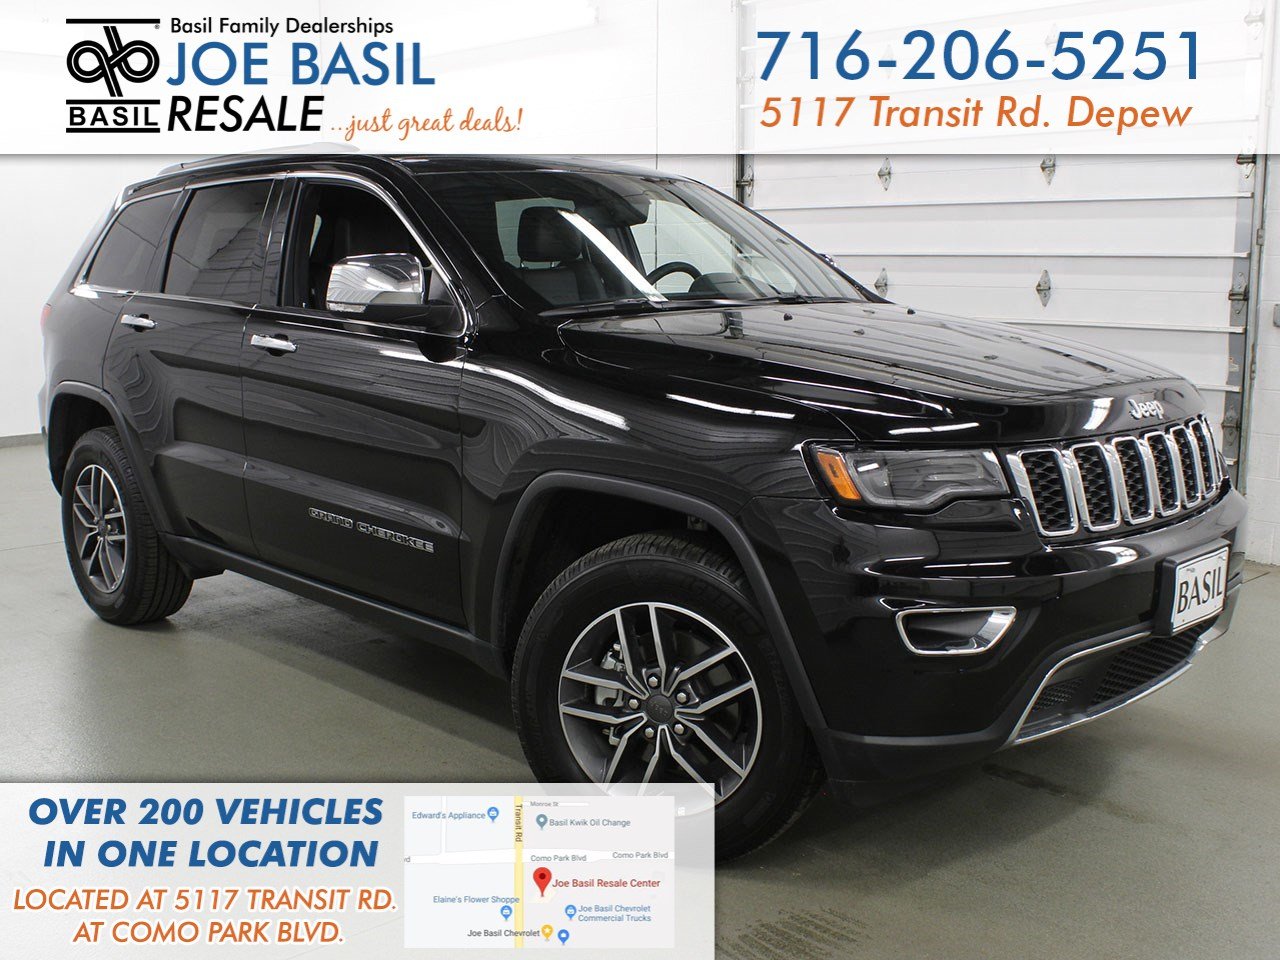 Used 2019 Jeep Grand Cherokee Limited With Navigation 4wd H3064 In Depew Ny Basil Family Dealerships